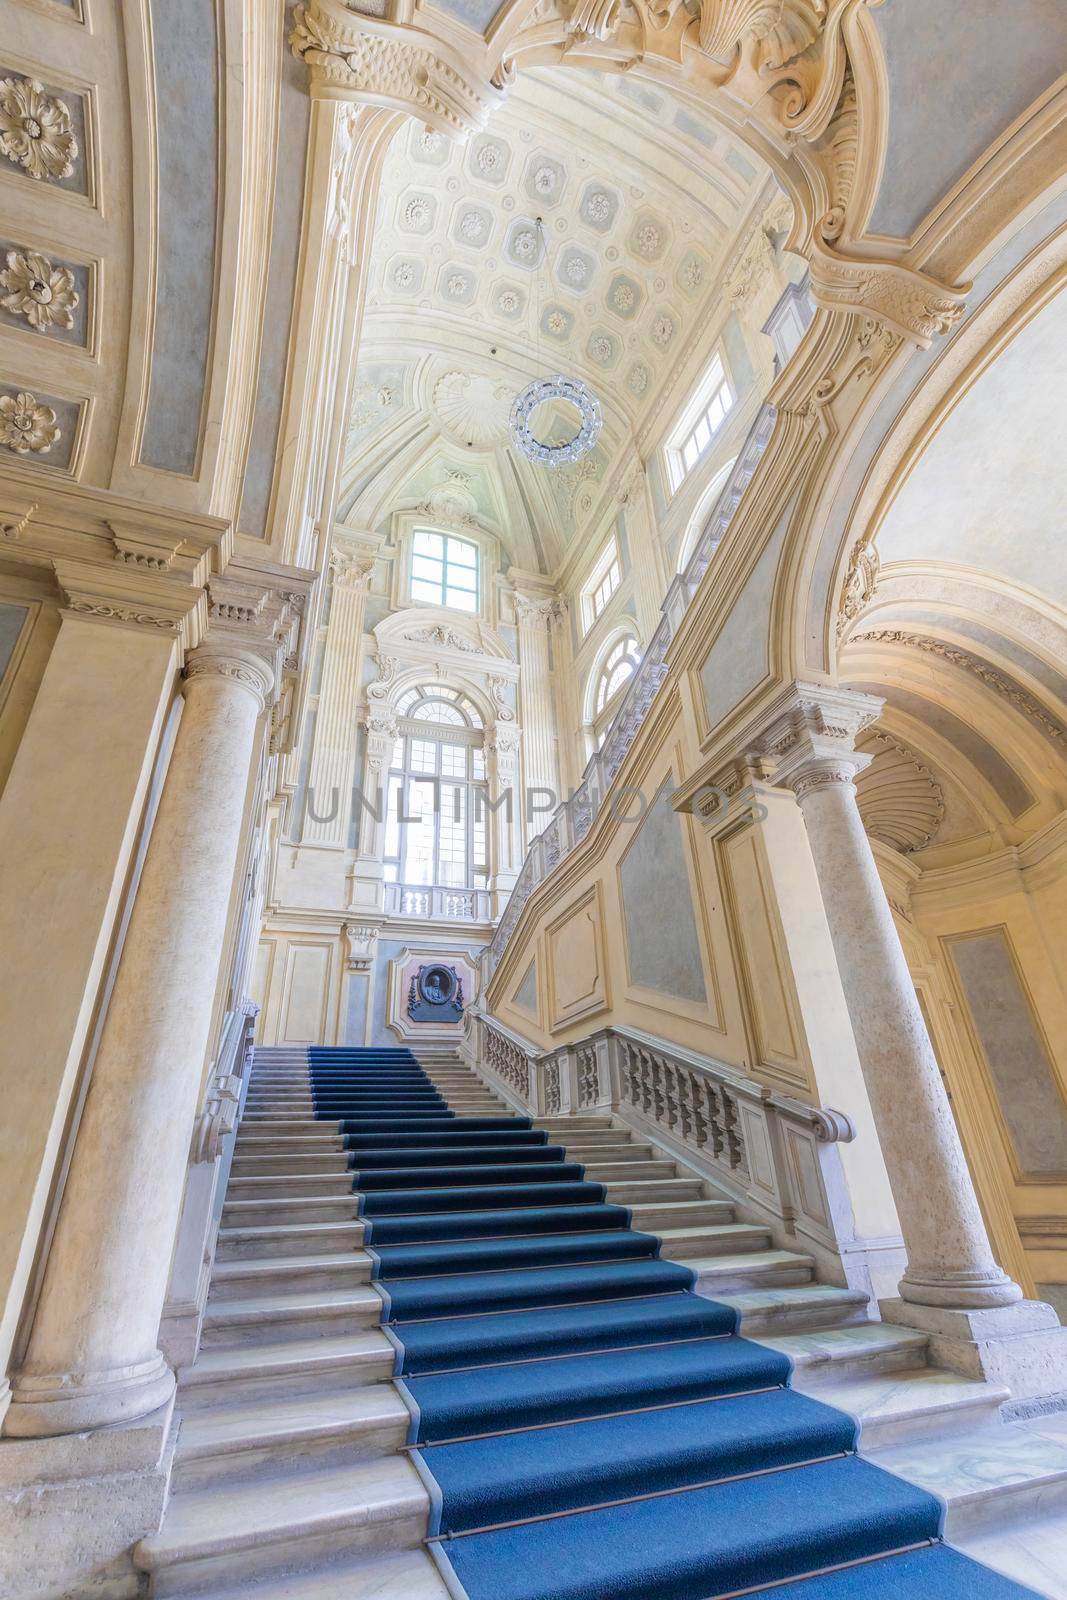 The most beautiful Baroque staircase of Europe located in Madama Palace (Palazzo Madama), Turin, Italy. Interior with luxury marbles, windows and corridors.  by Perseomedusa